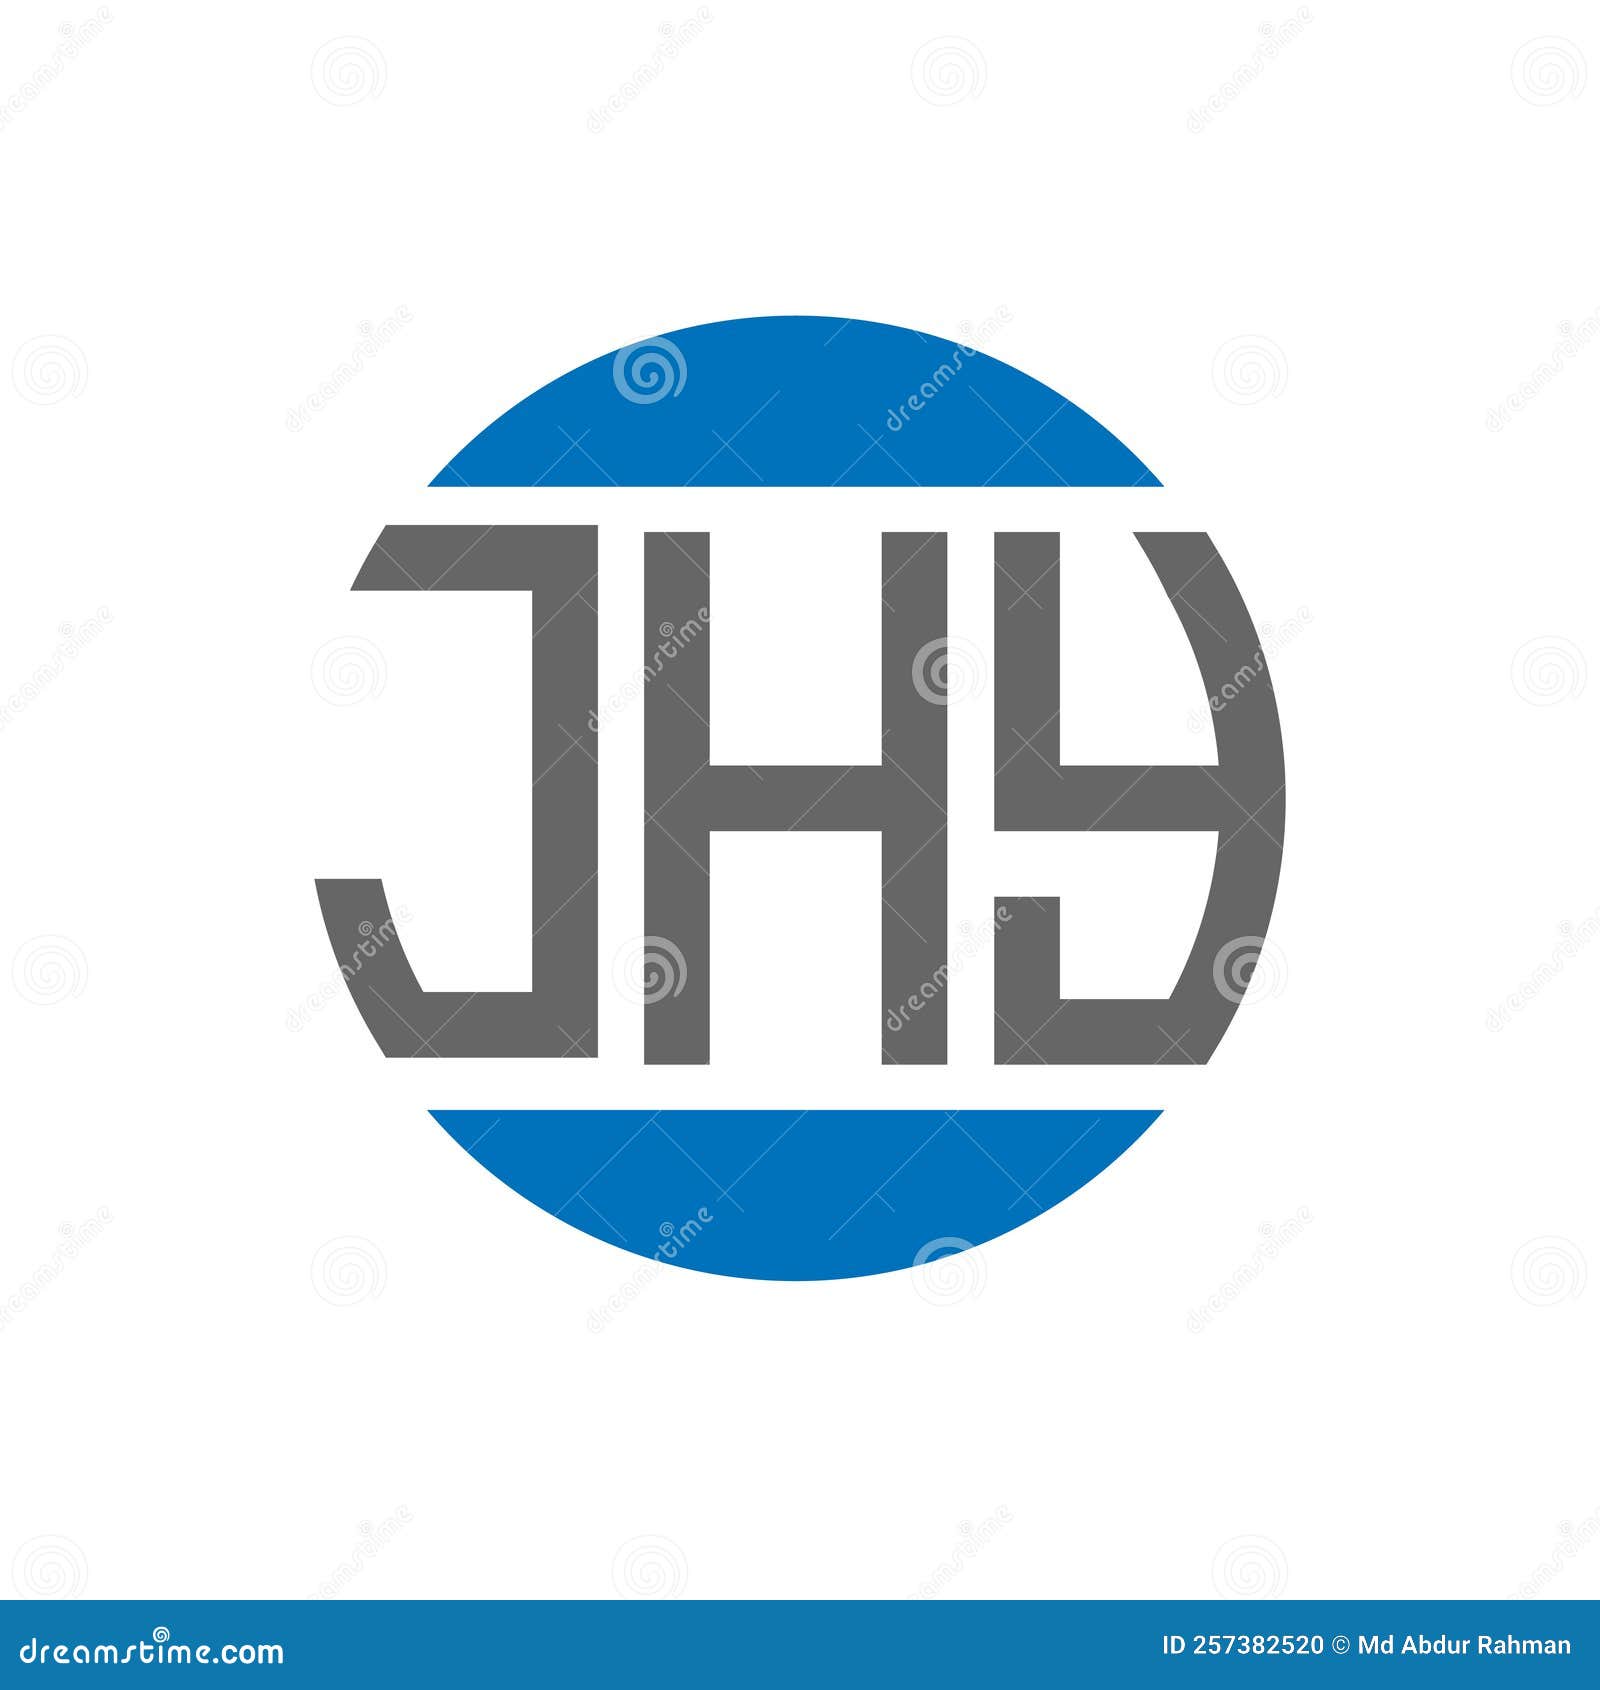 jhy letter logo  on white background. jhy creative initials circle logo concept. jhy letter 